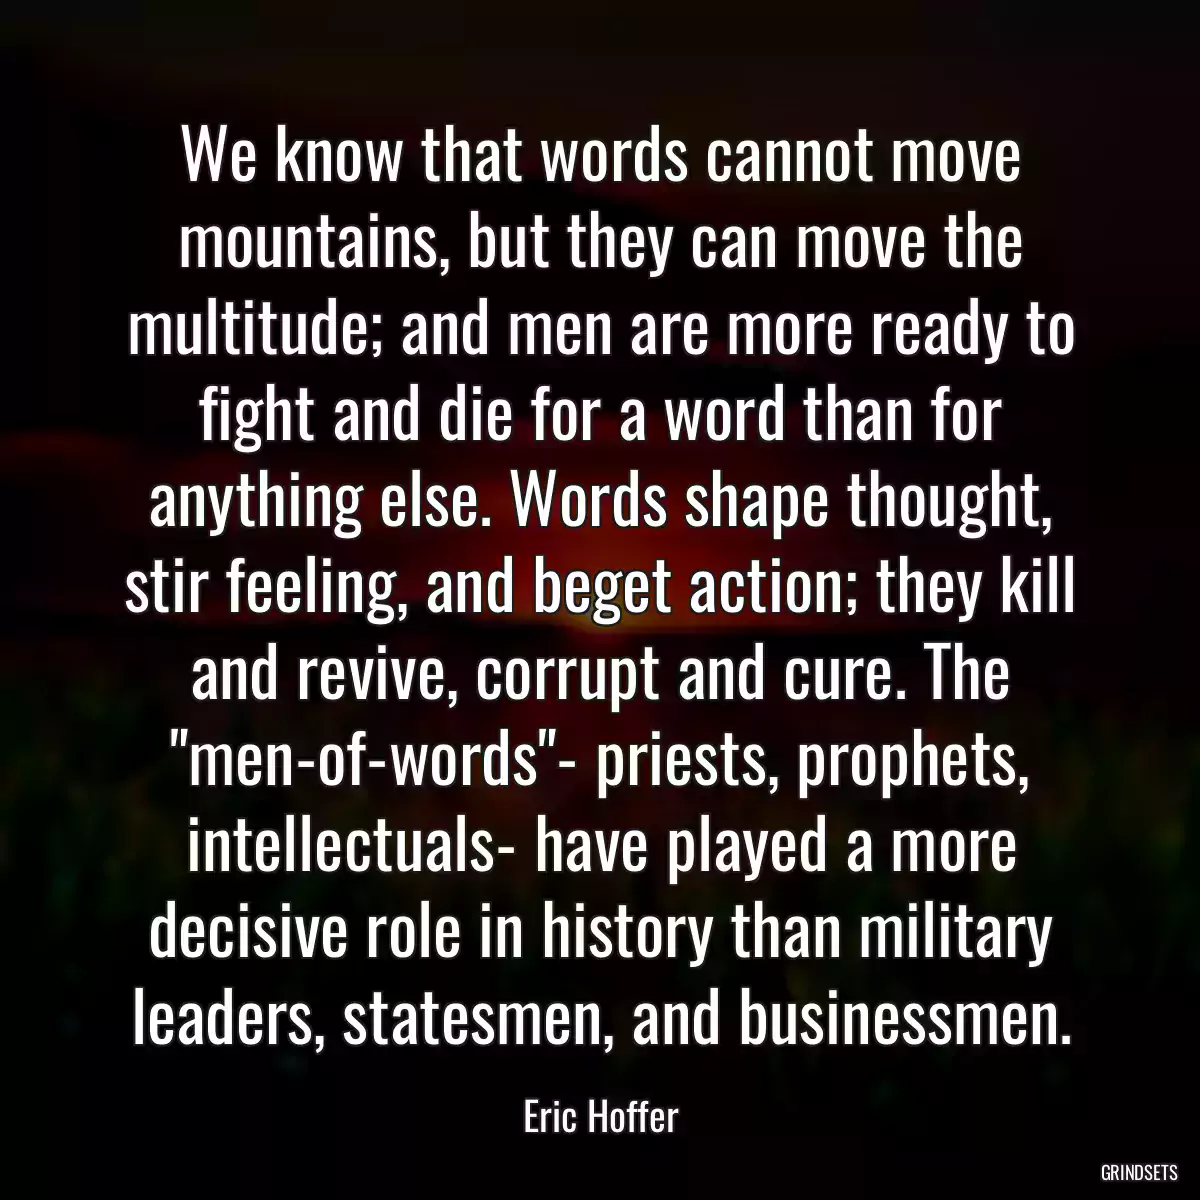 We know that words cannot move mountains, but they can move the multitude; and men are more ready to fight and die for a word than for anything else. Words shape thought, stir feeling, and beget action; they kill and revive, corrupt and cure. The \